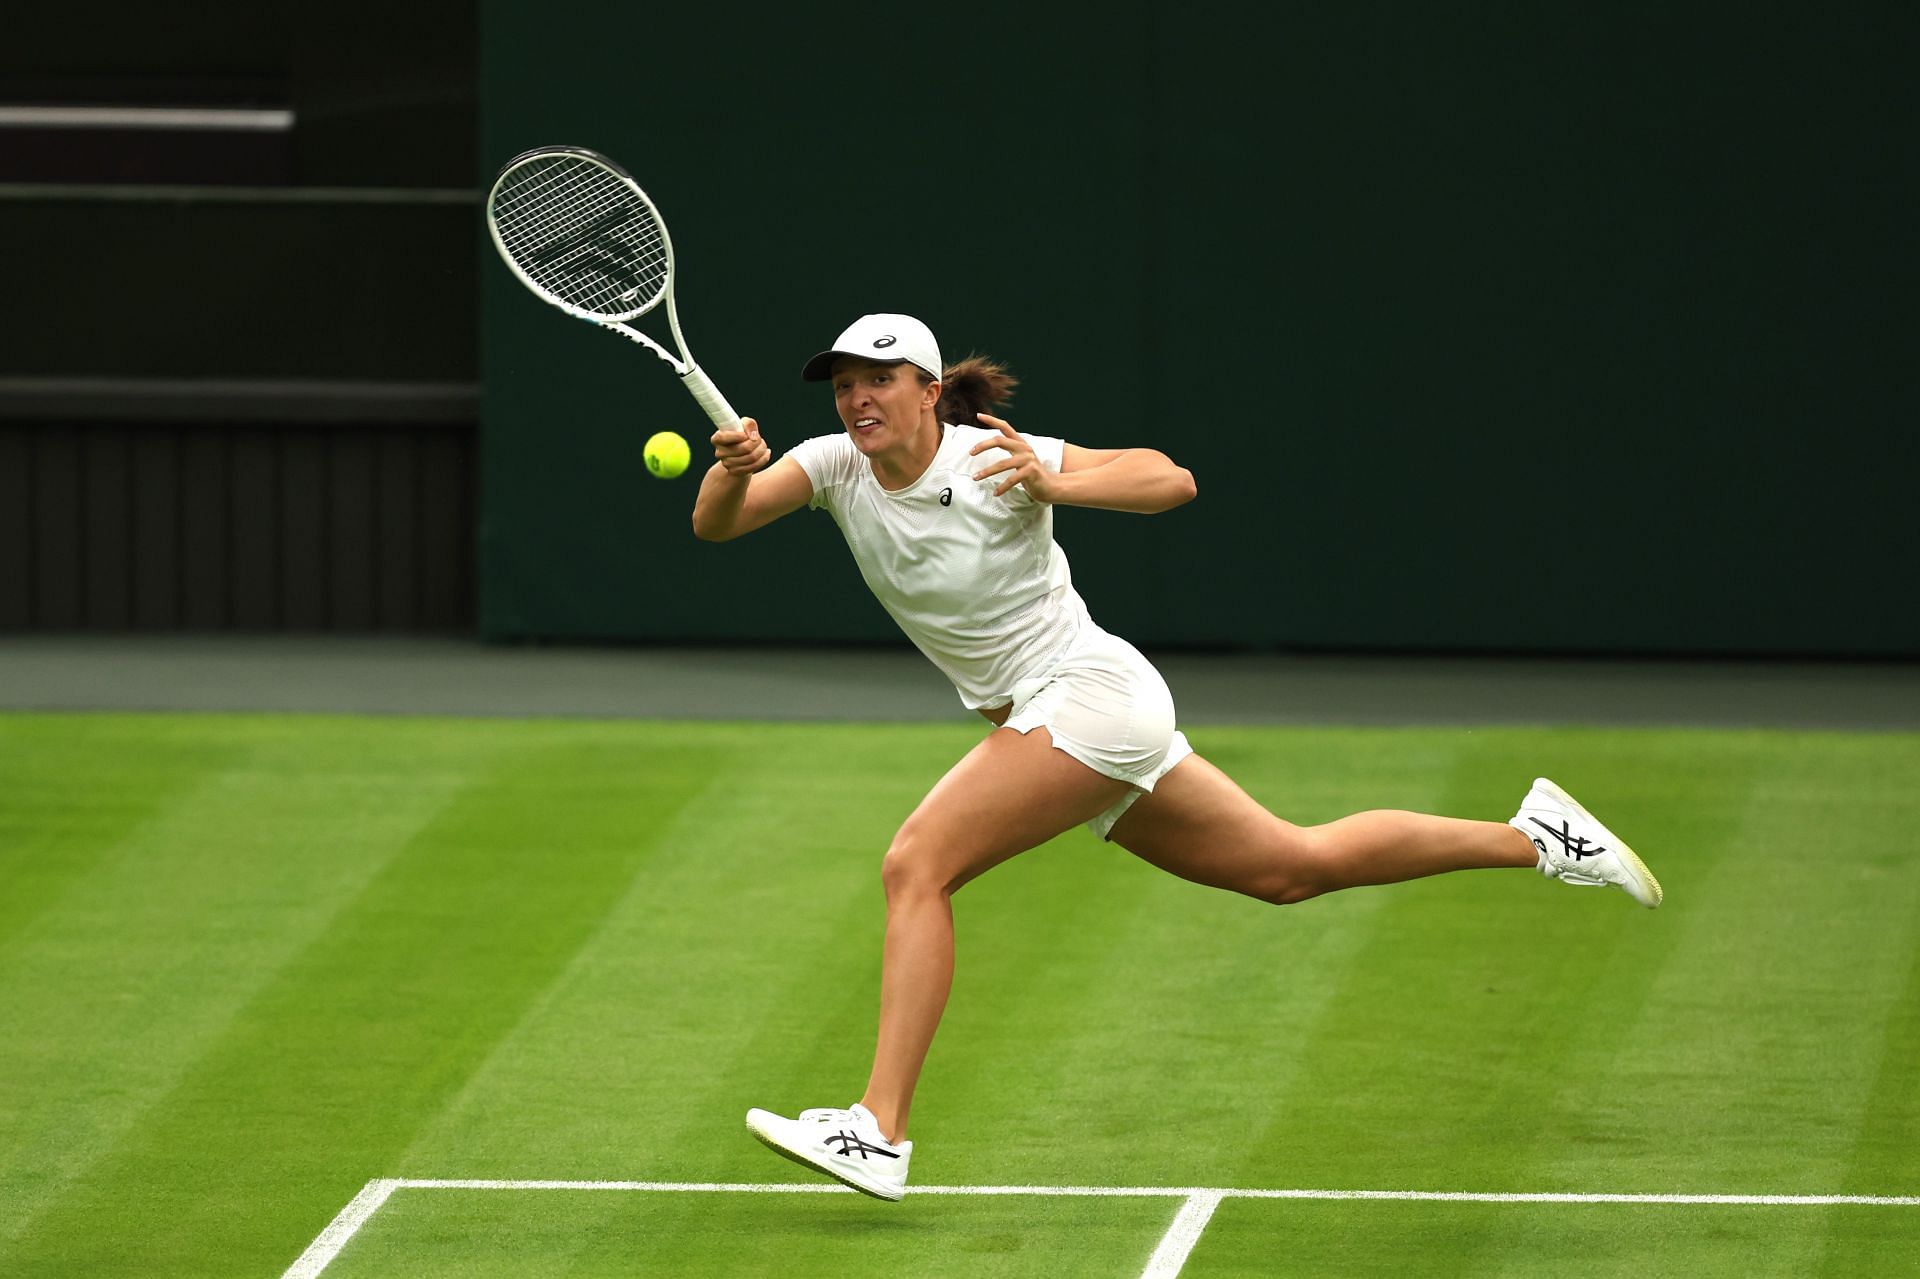 Iga Swiatek during a training session ahead of the 2022 Wimbledon Championships